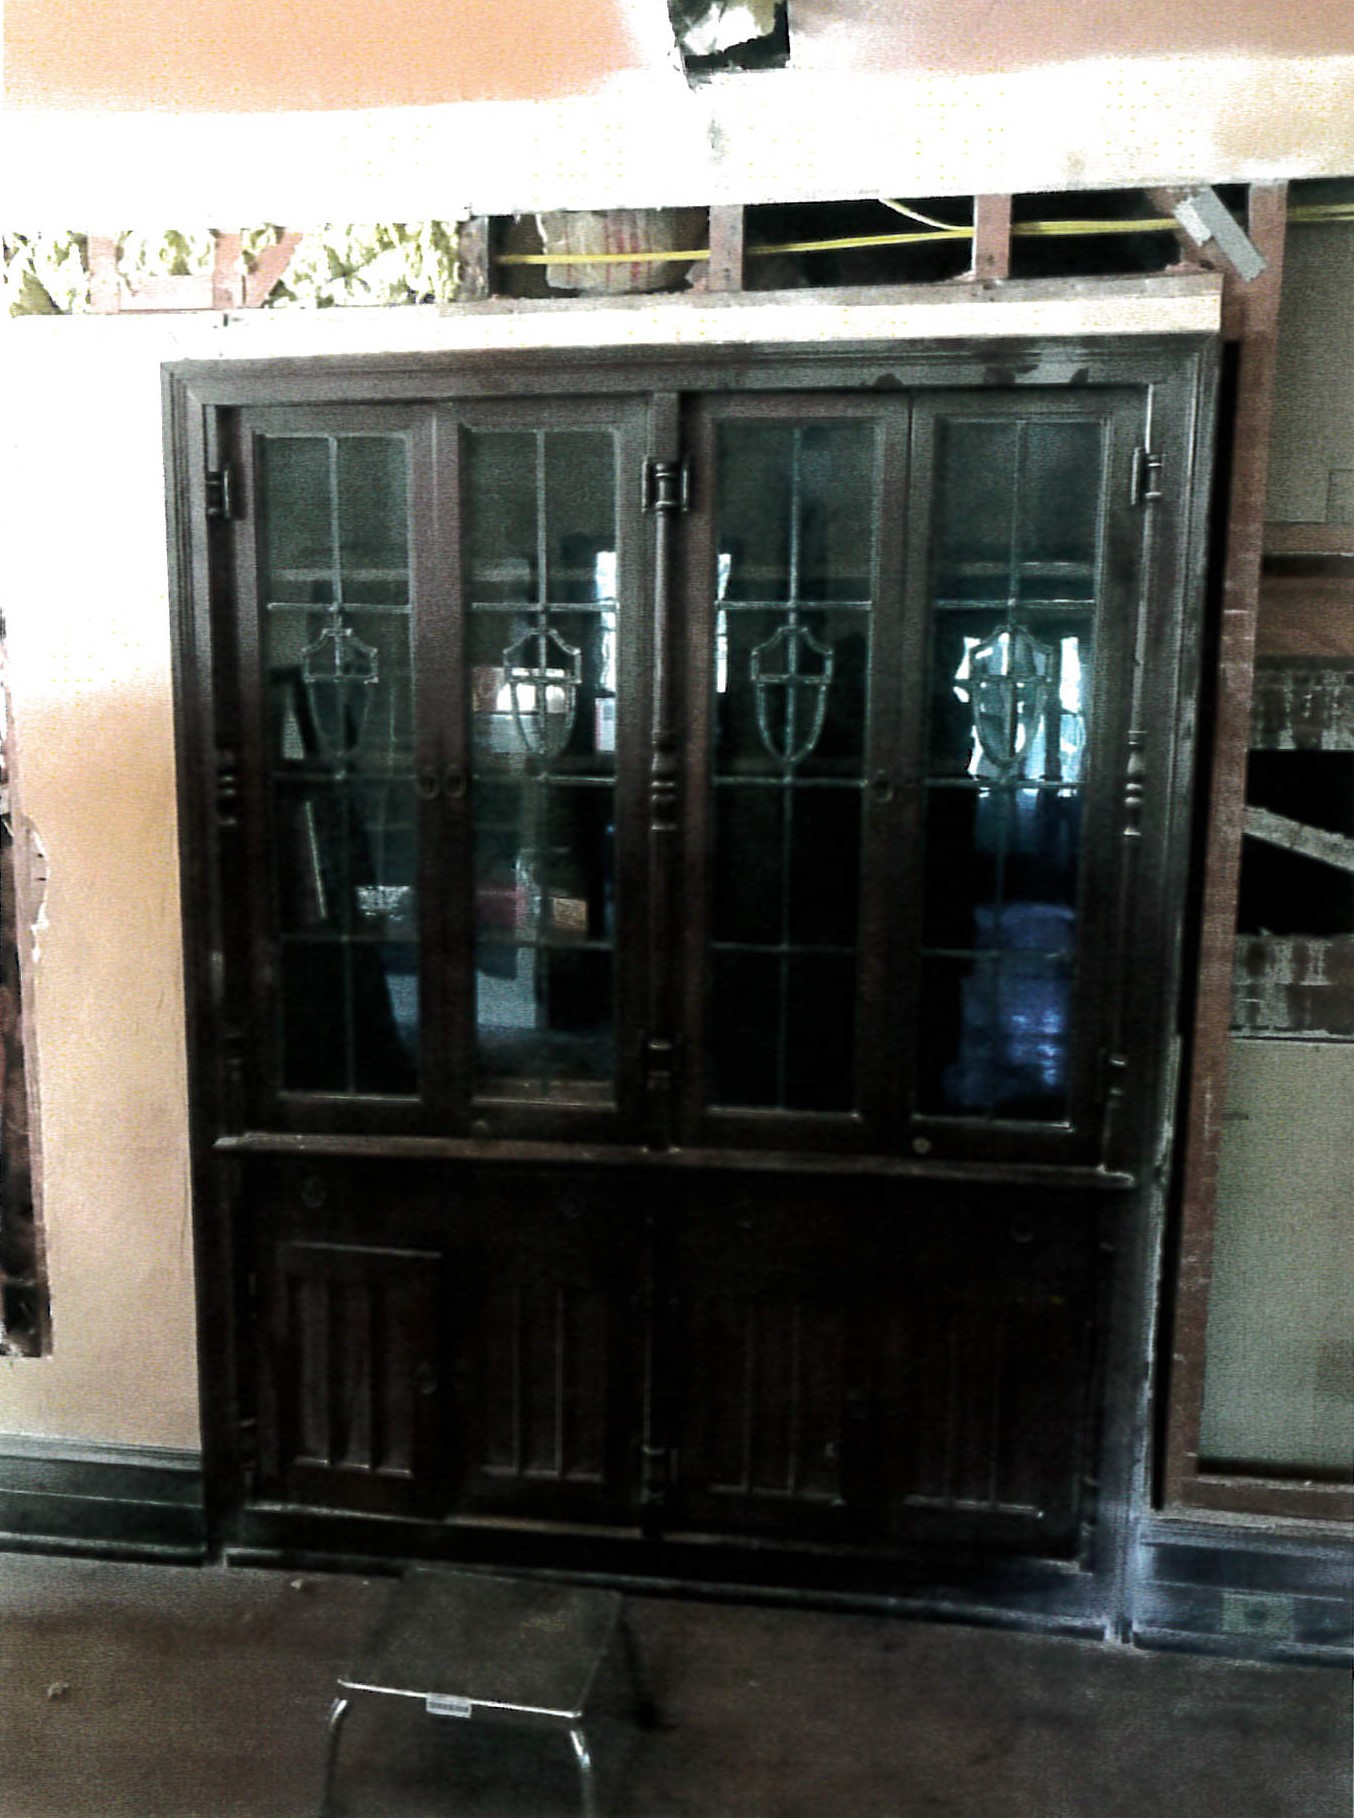 Built-in China cabinet in dining room 